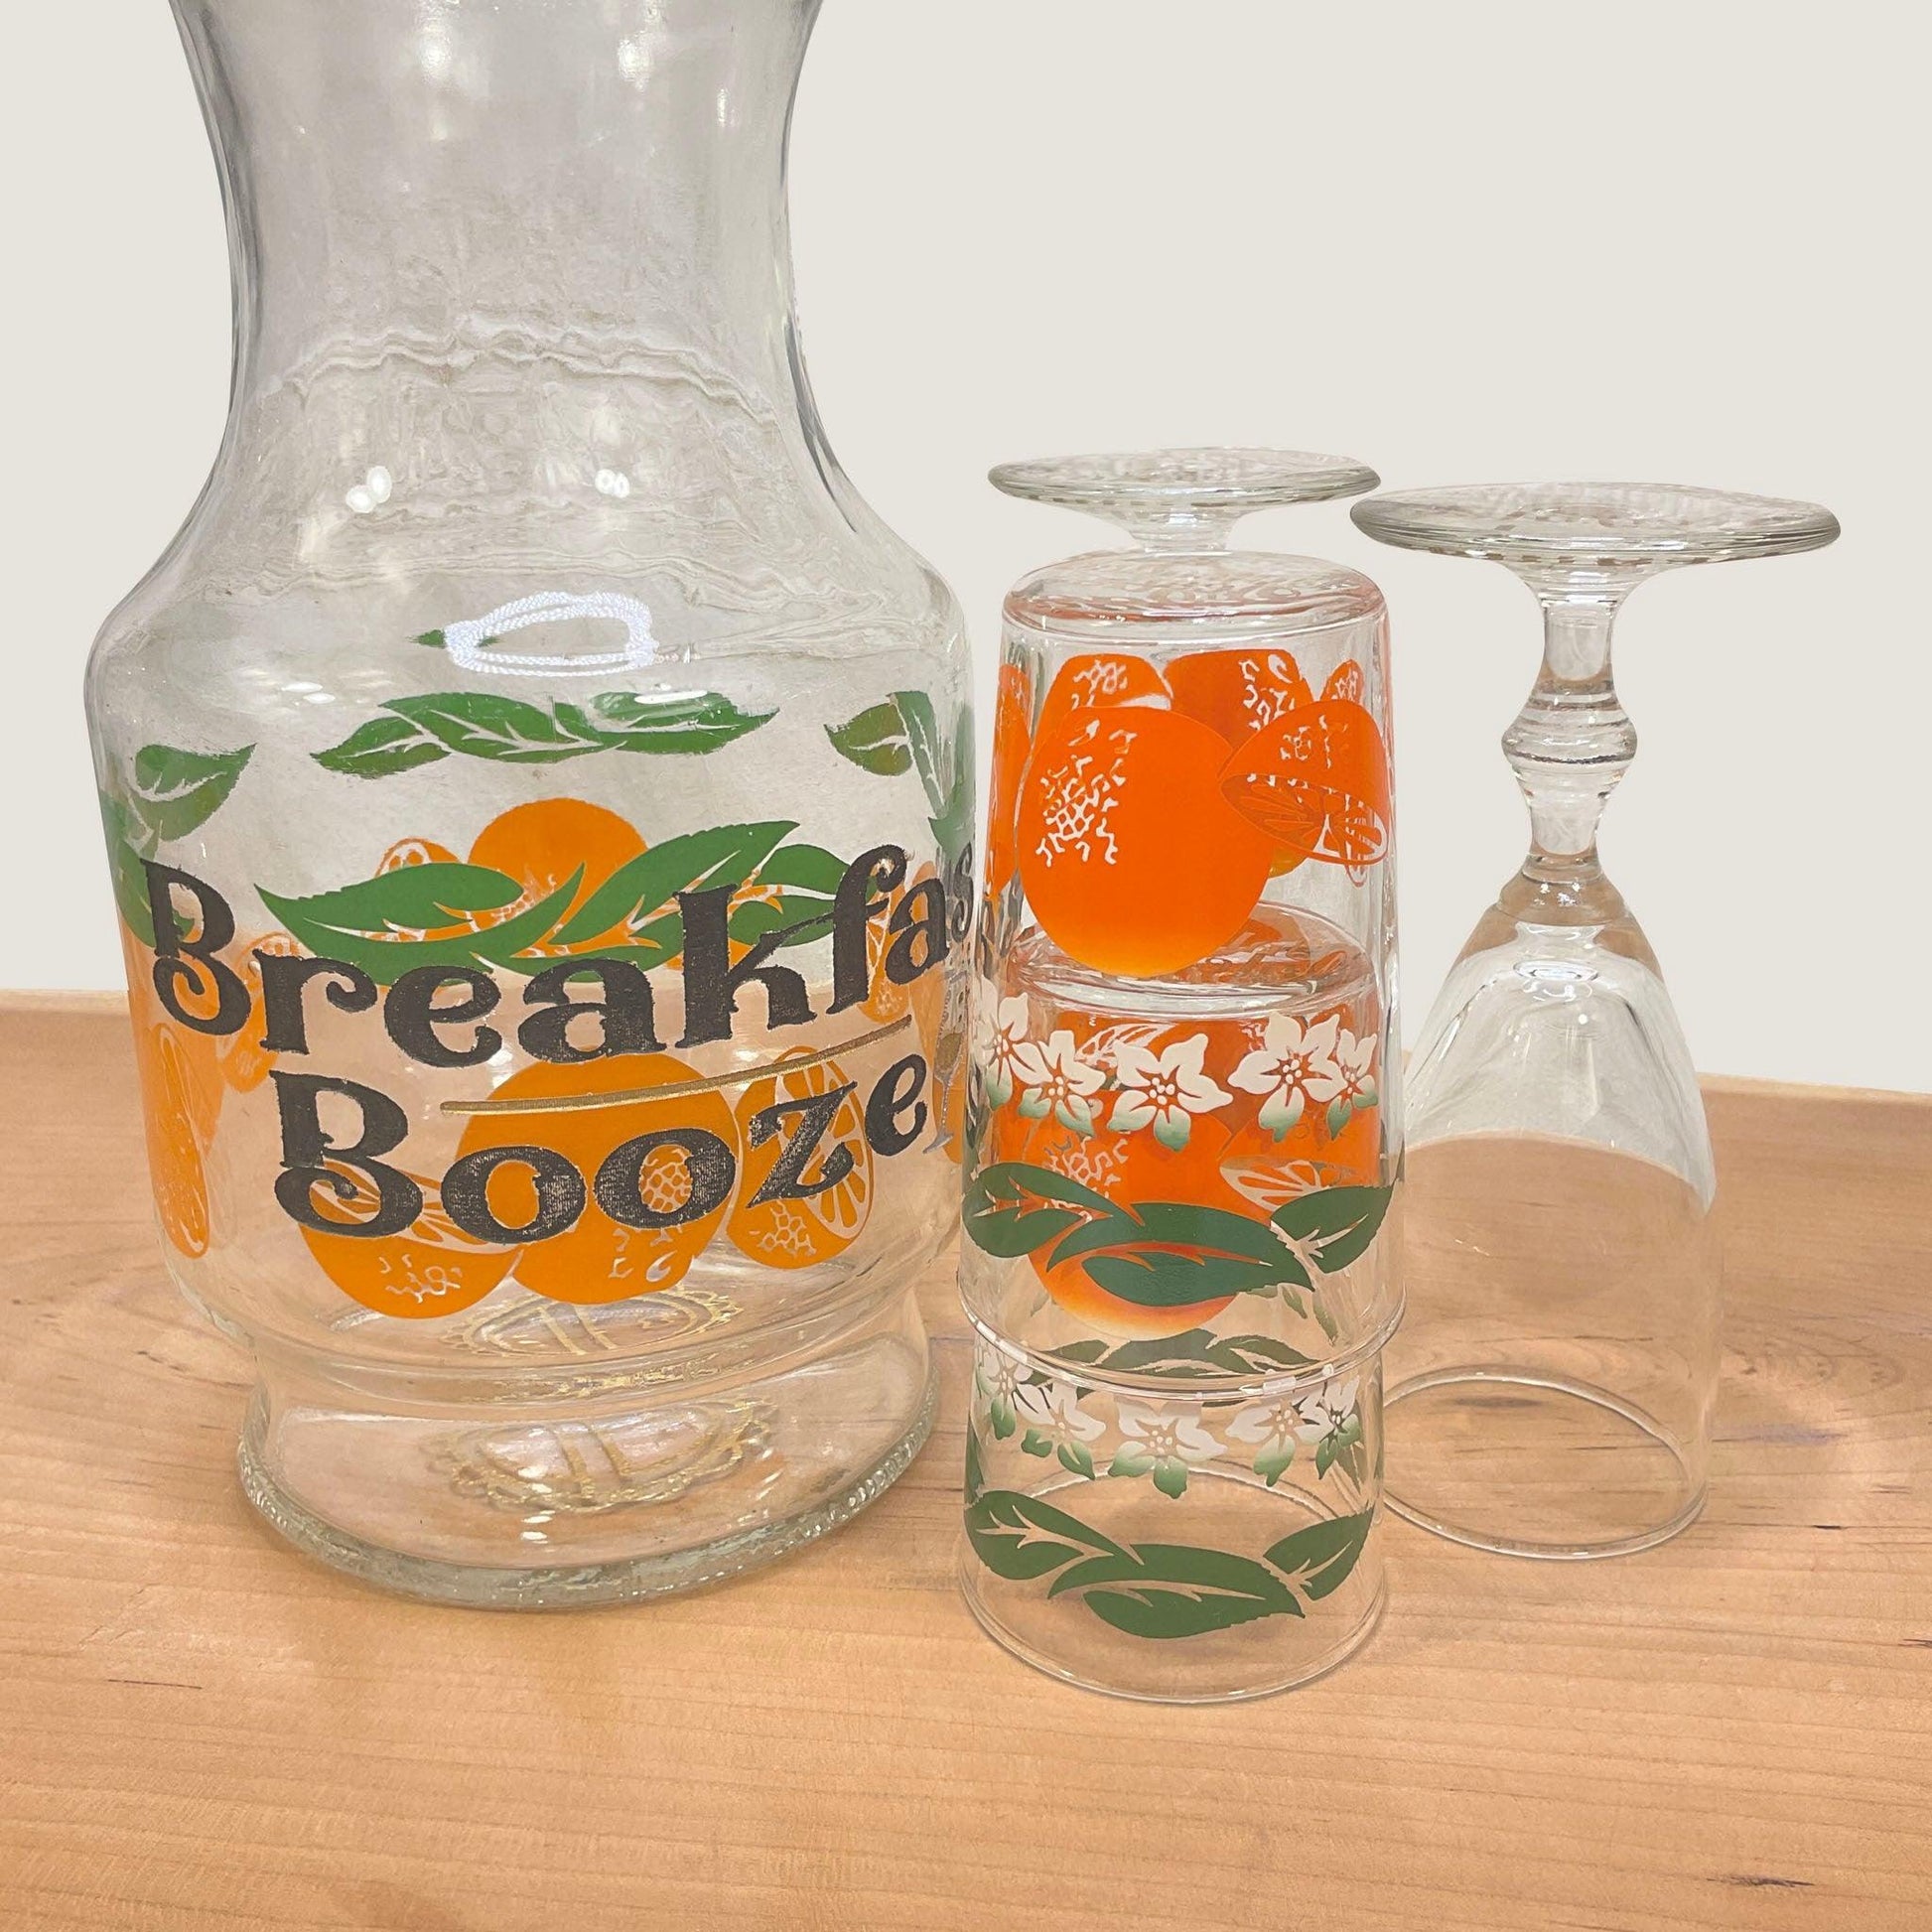 Breakfast Booze Mimosa Set - Offensively Domestic